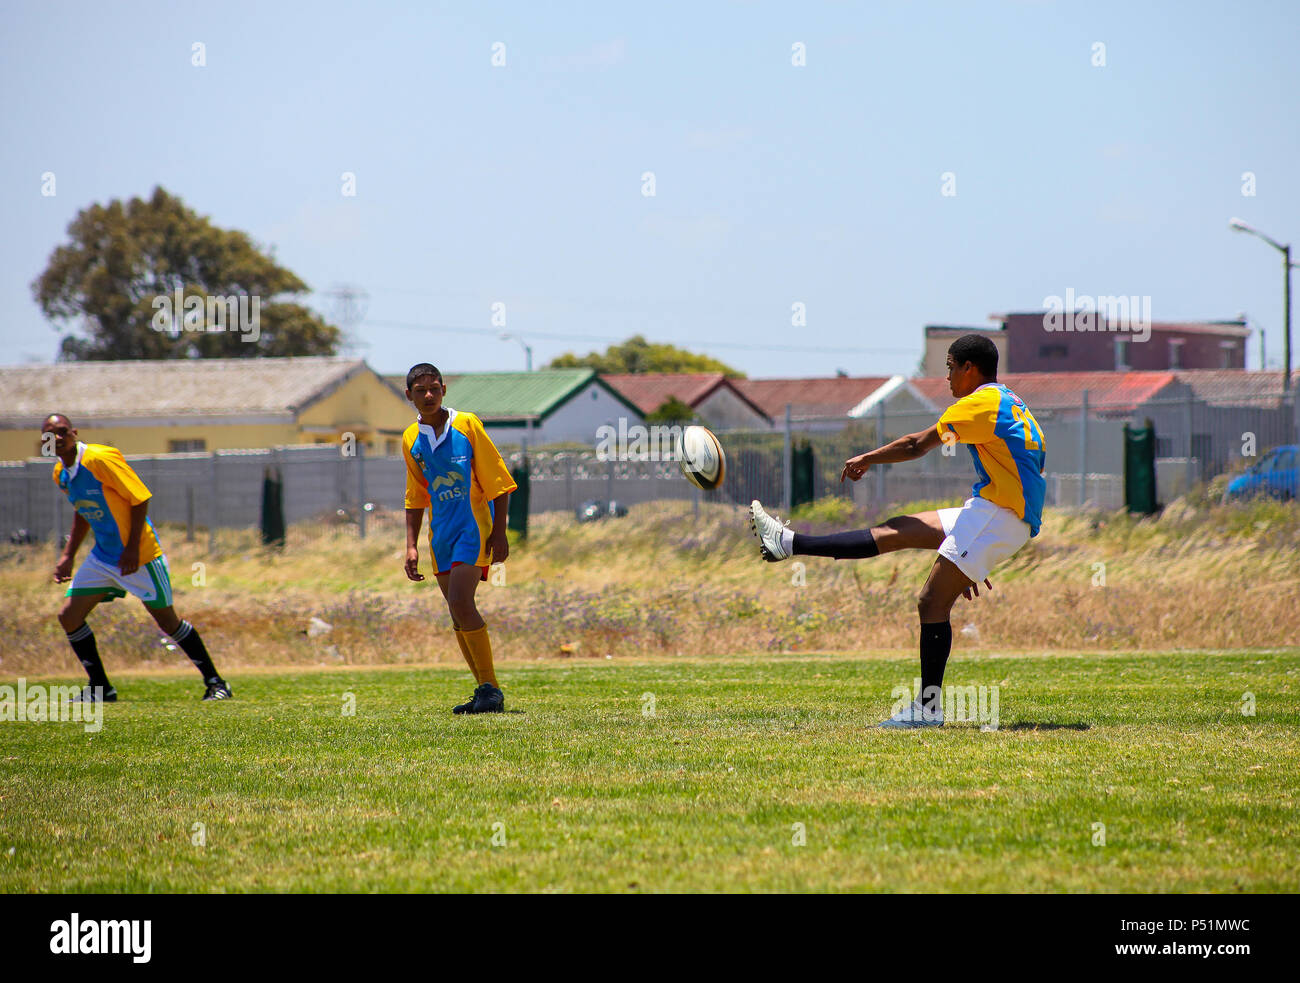 Cape Town, South Africa, December 06, 2011, Diverse children playing Rugby at school Stock Photo